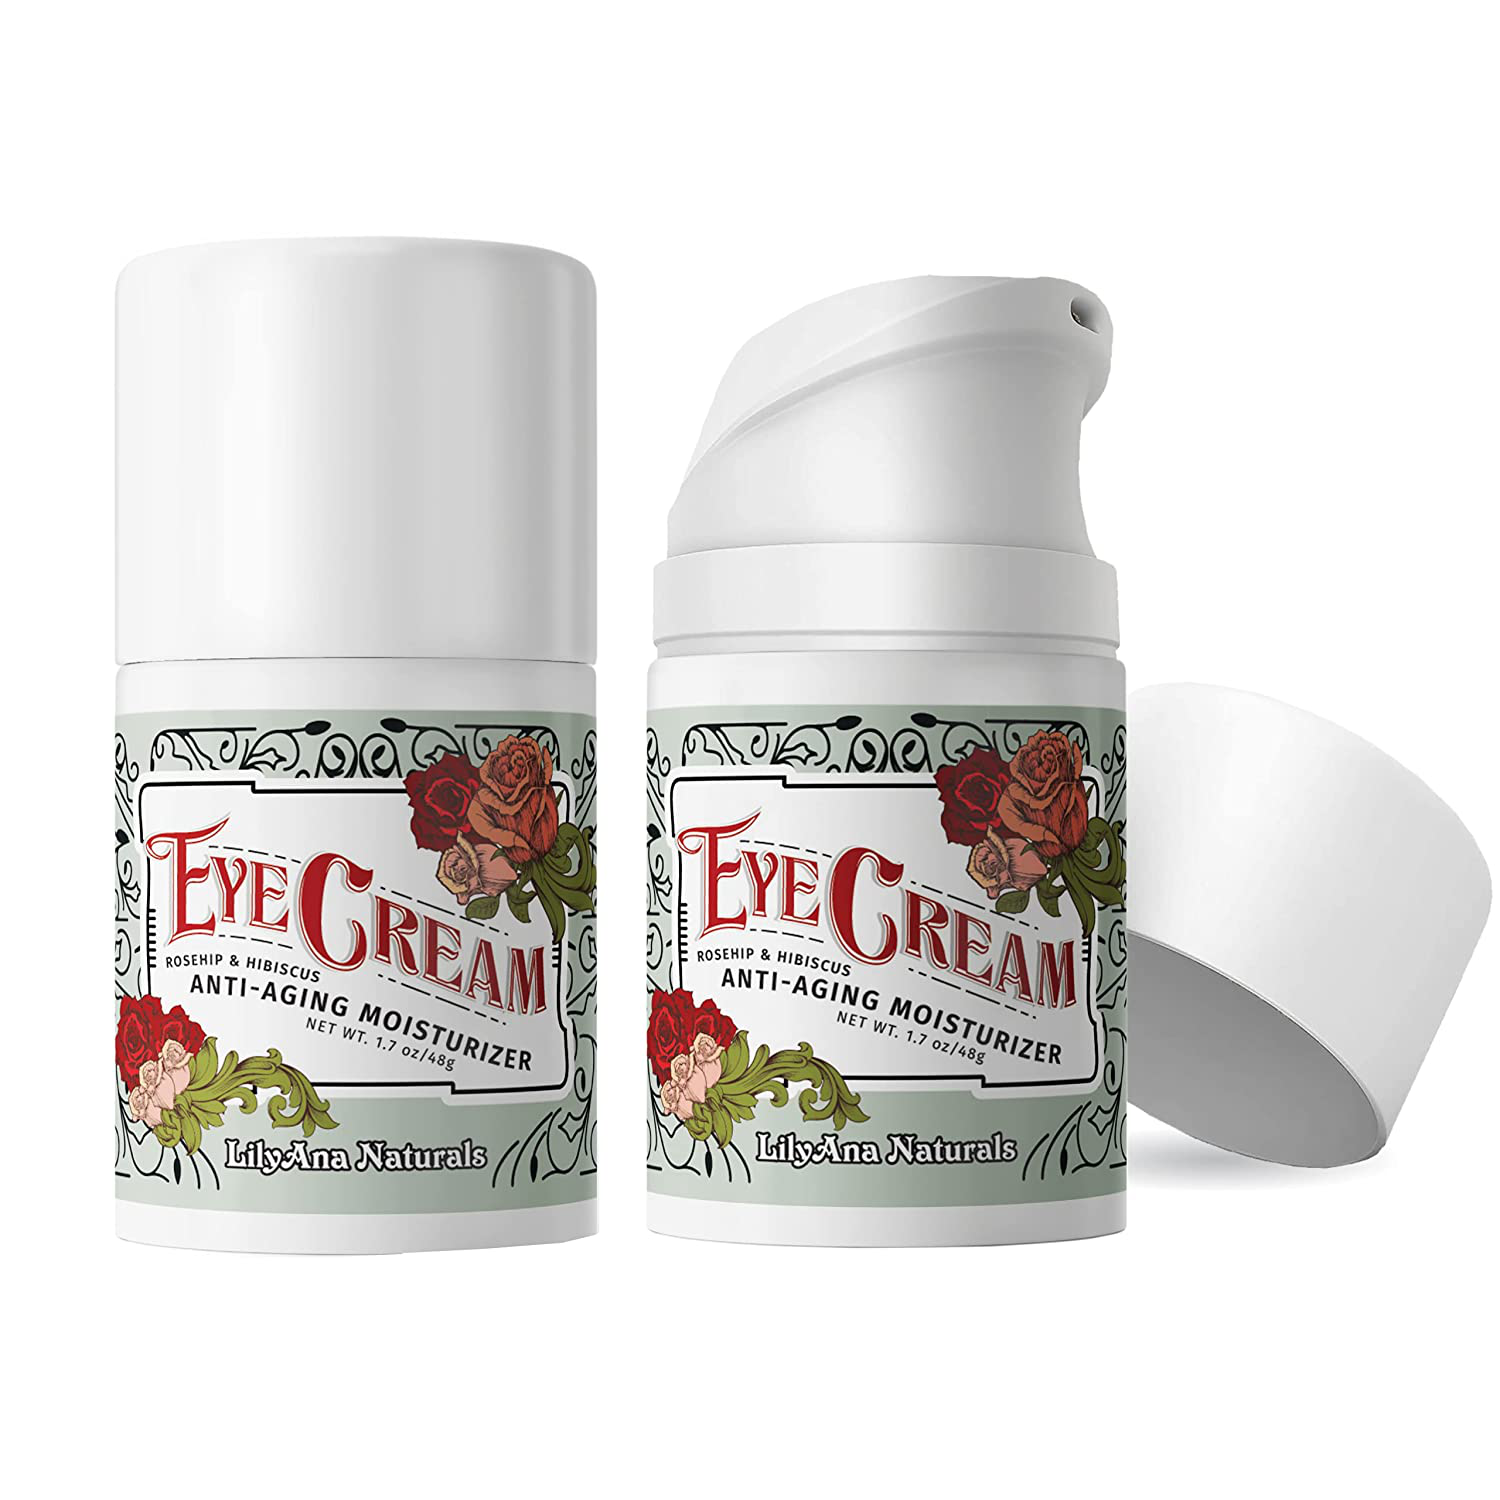 Lilyana Naturals Eye Cream - 2-Month Supply - Made in USA, Eye Cream for Dark Circles and Puffiness, under Eye Cream, anti Aging Eye Cream, Improve the Look of Fine Lines and Wrinkles, Rosehip and Hibiscus Botanicals - 1.7Oz (1-Pack)